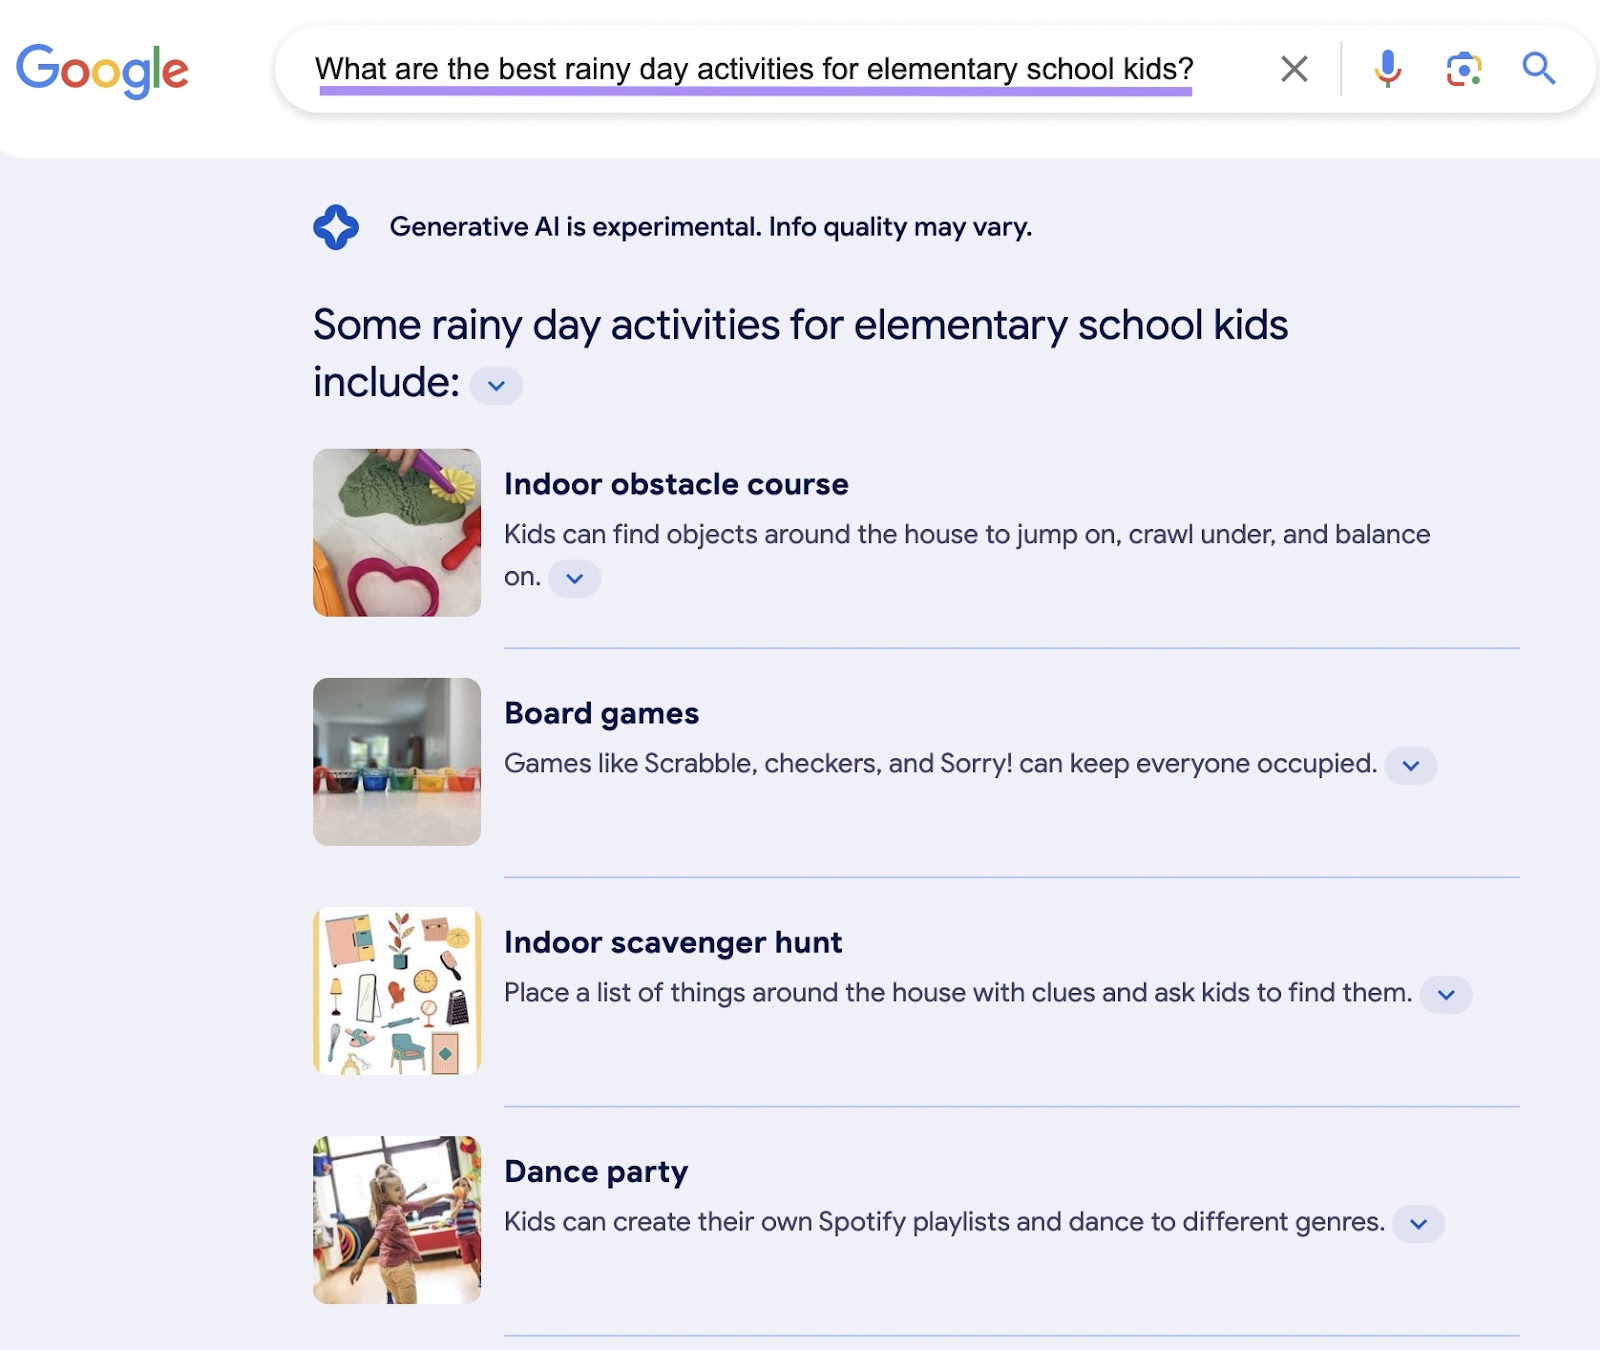 Google SGE results for "What are the best rainy day activities for elementary school kids?"